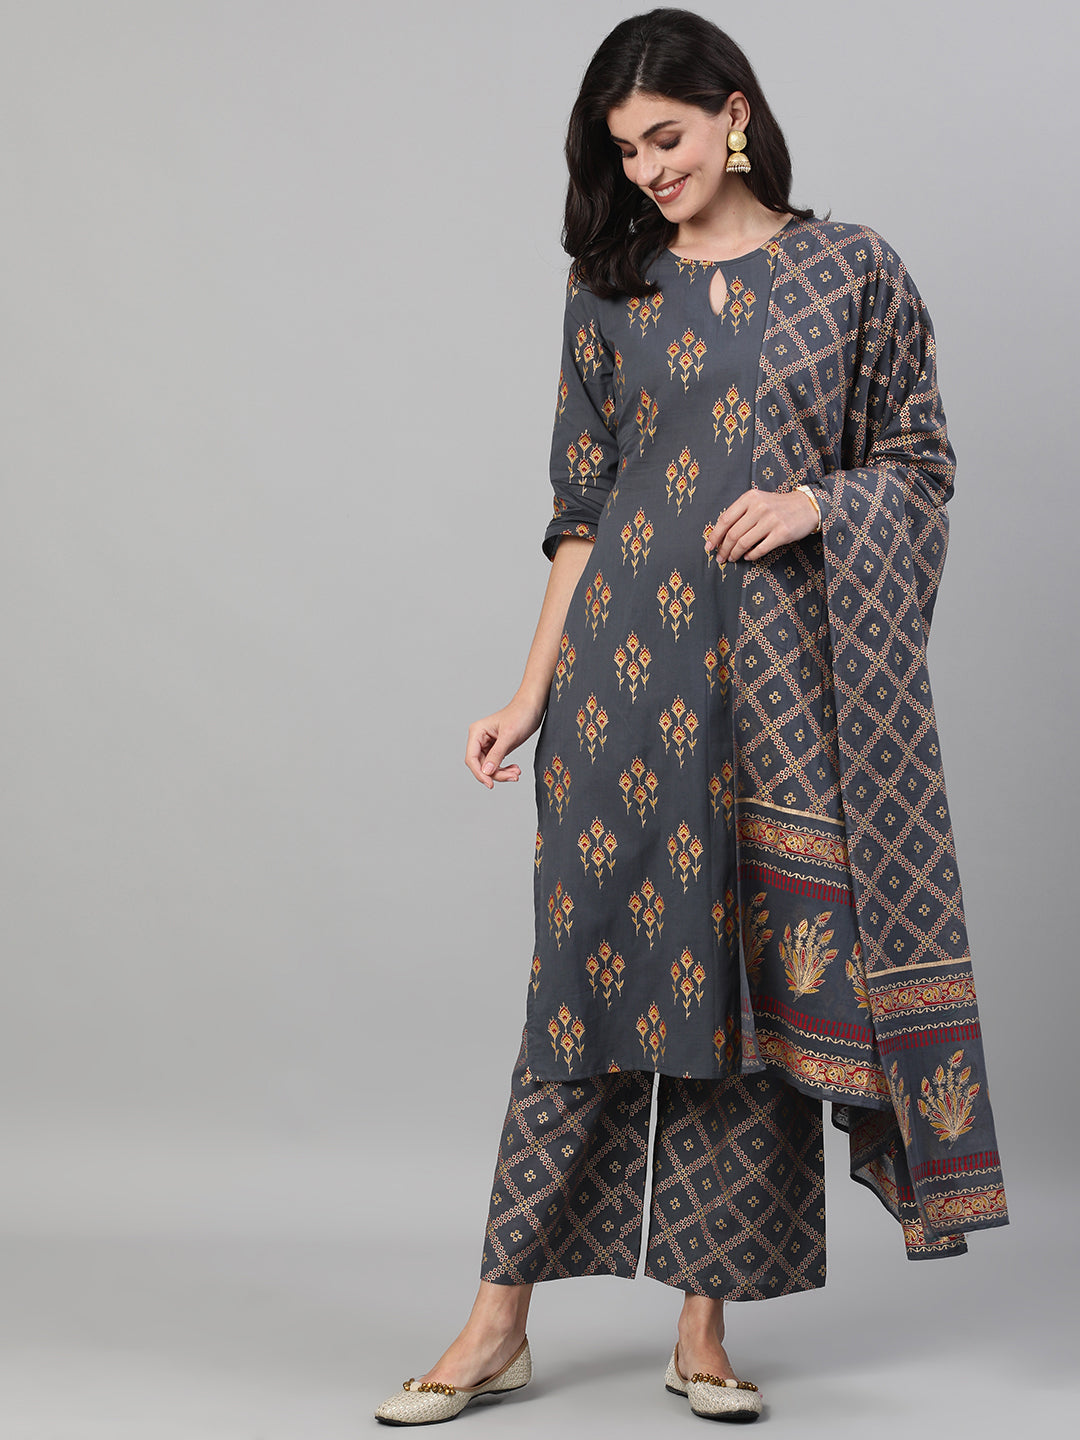 Women's Steel Grey Gold Printed Three-Quarter Sleeves Straight Kurta With Palazzo and Dupatta with pockets And Face Mask - Taantav